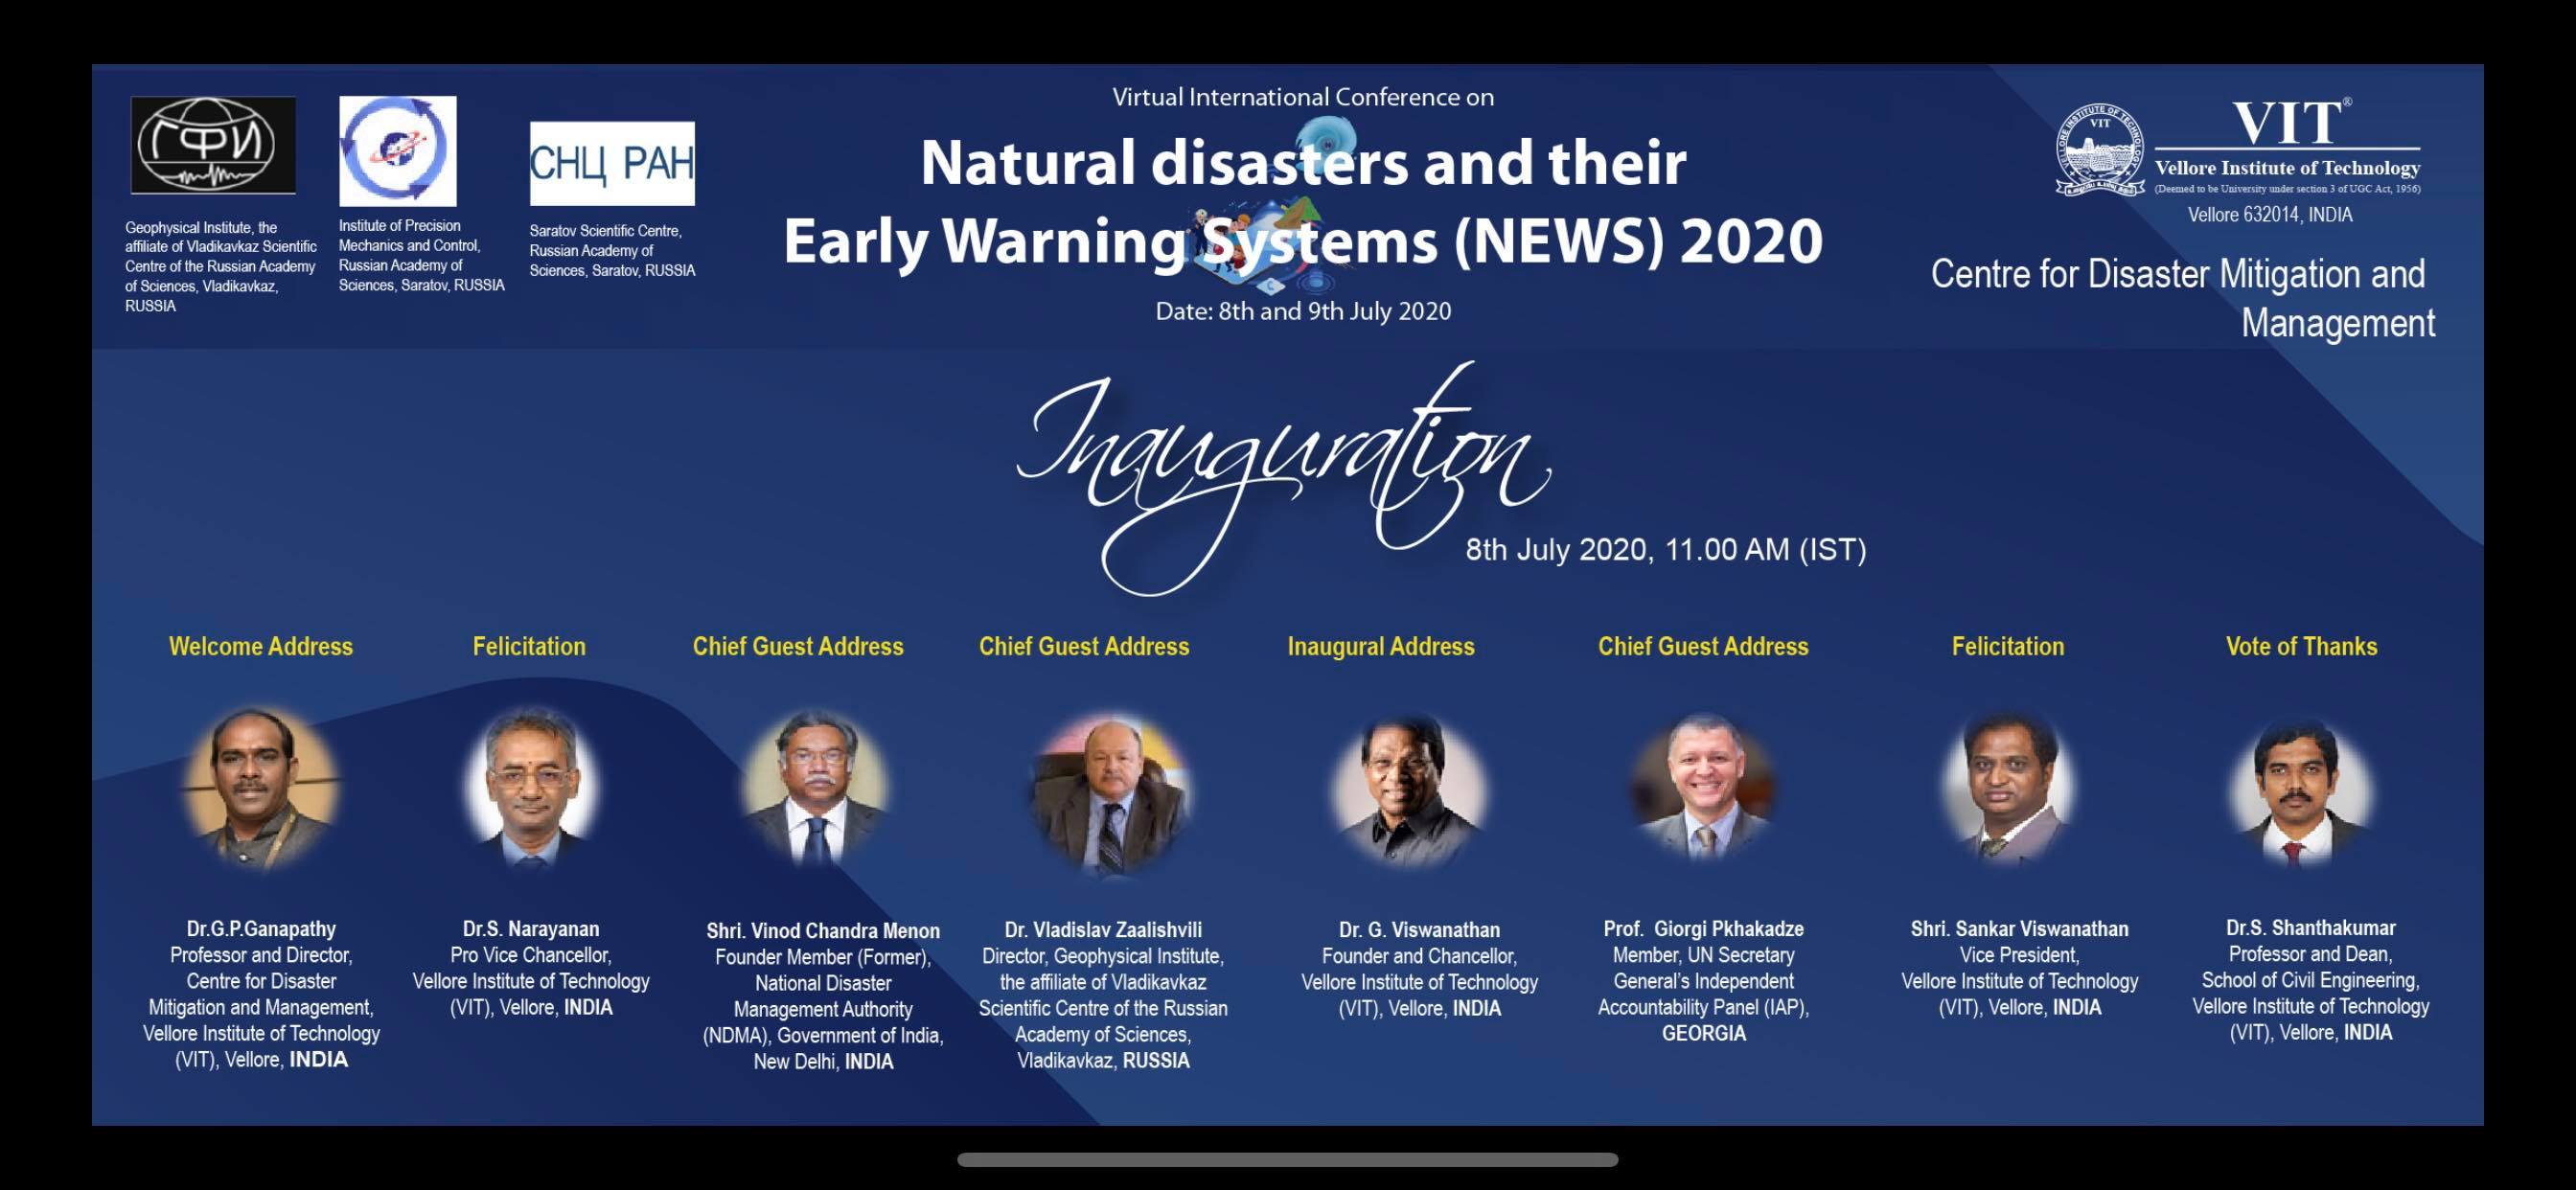 Conference on “Natural Disasters and their Early Warning Systems 2020”